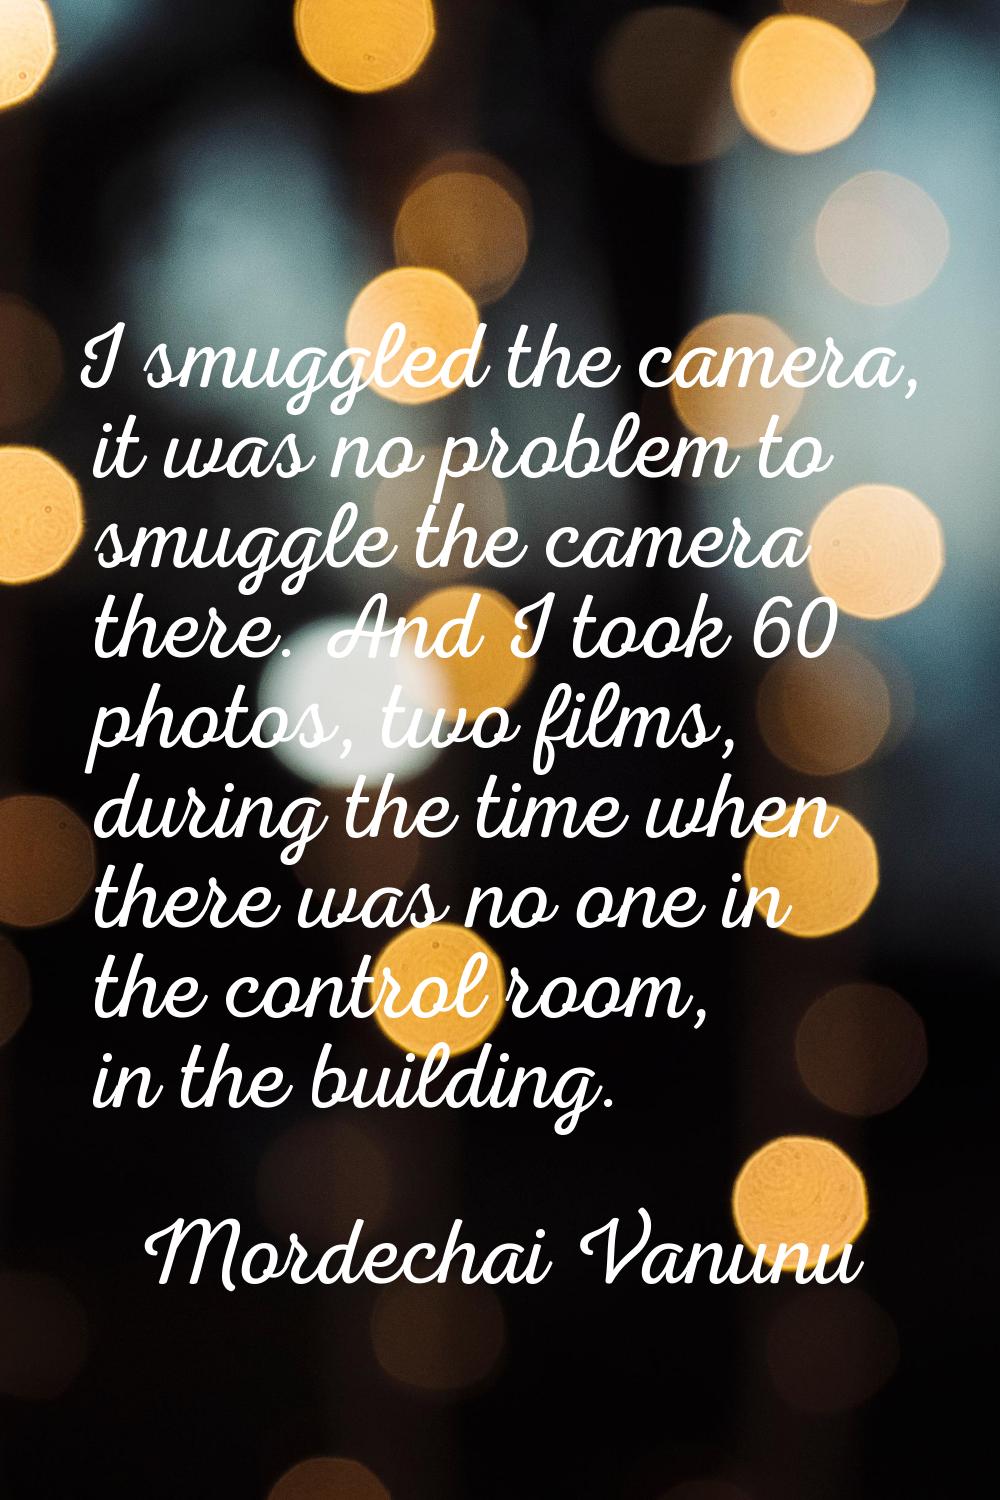 I smuggled the camera, it was no problem to smuggle the camera there. And I took 60 photos, two fil